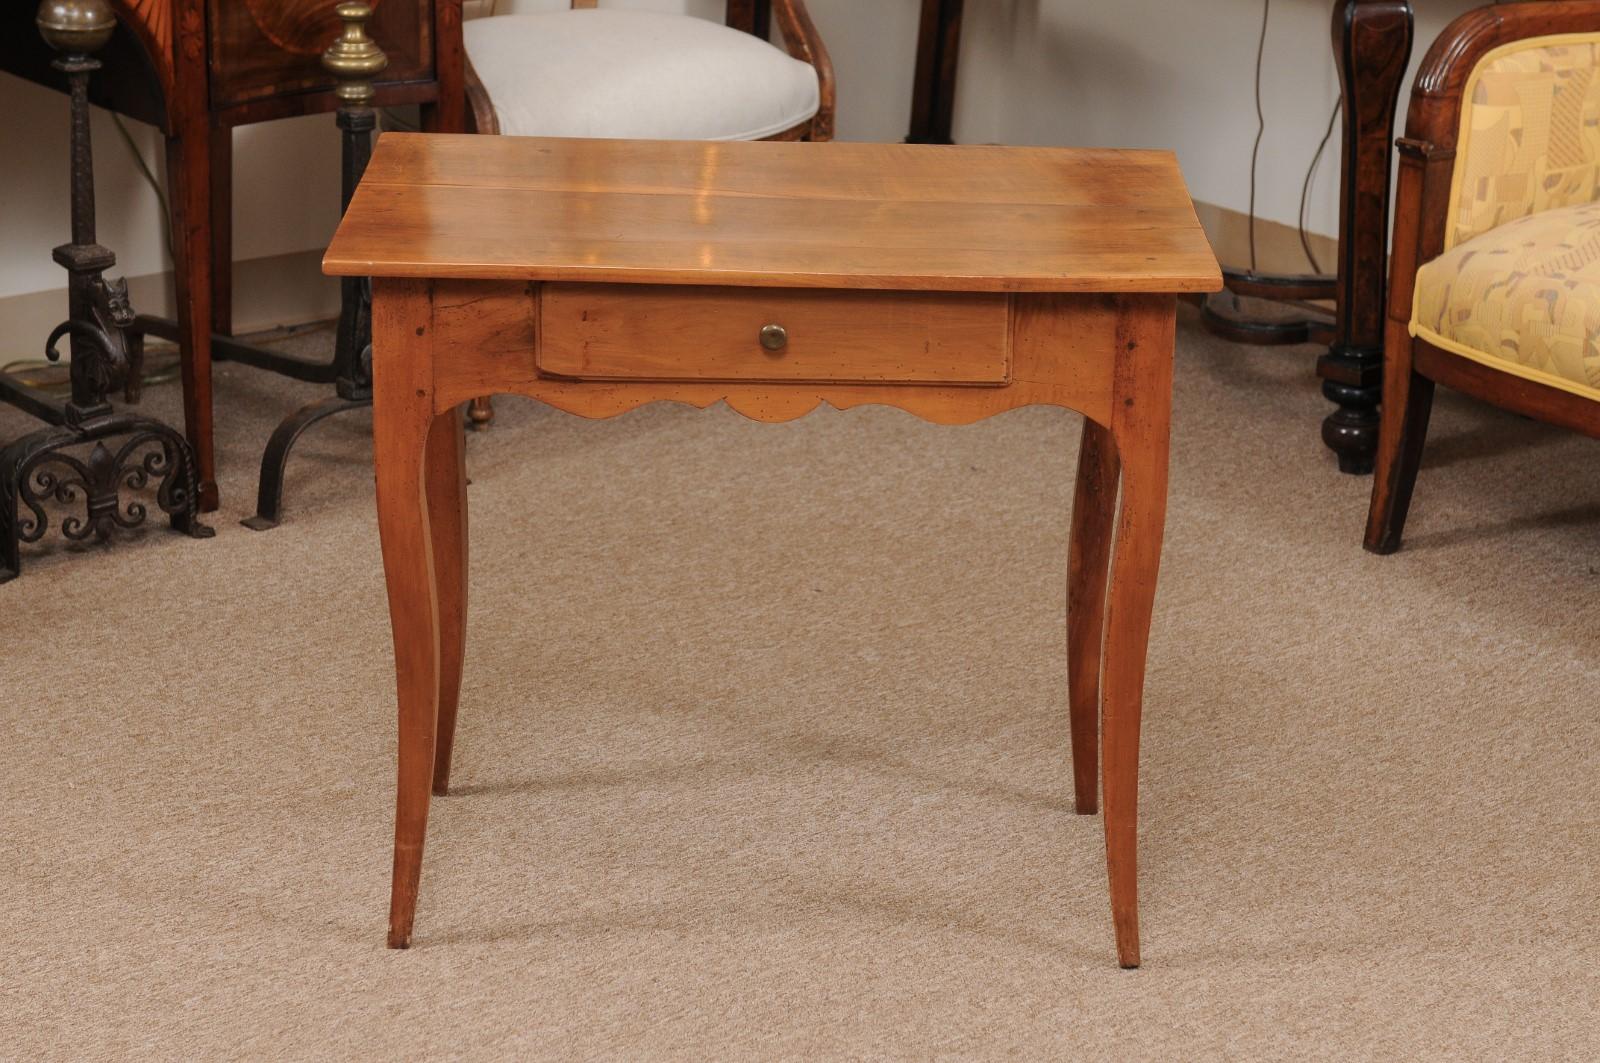 Louis XV Style Fruitwood Side Table with Drawer, 19th Century France For Sale 8